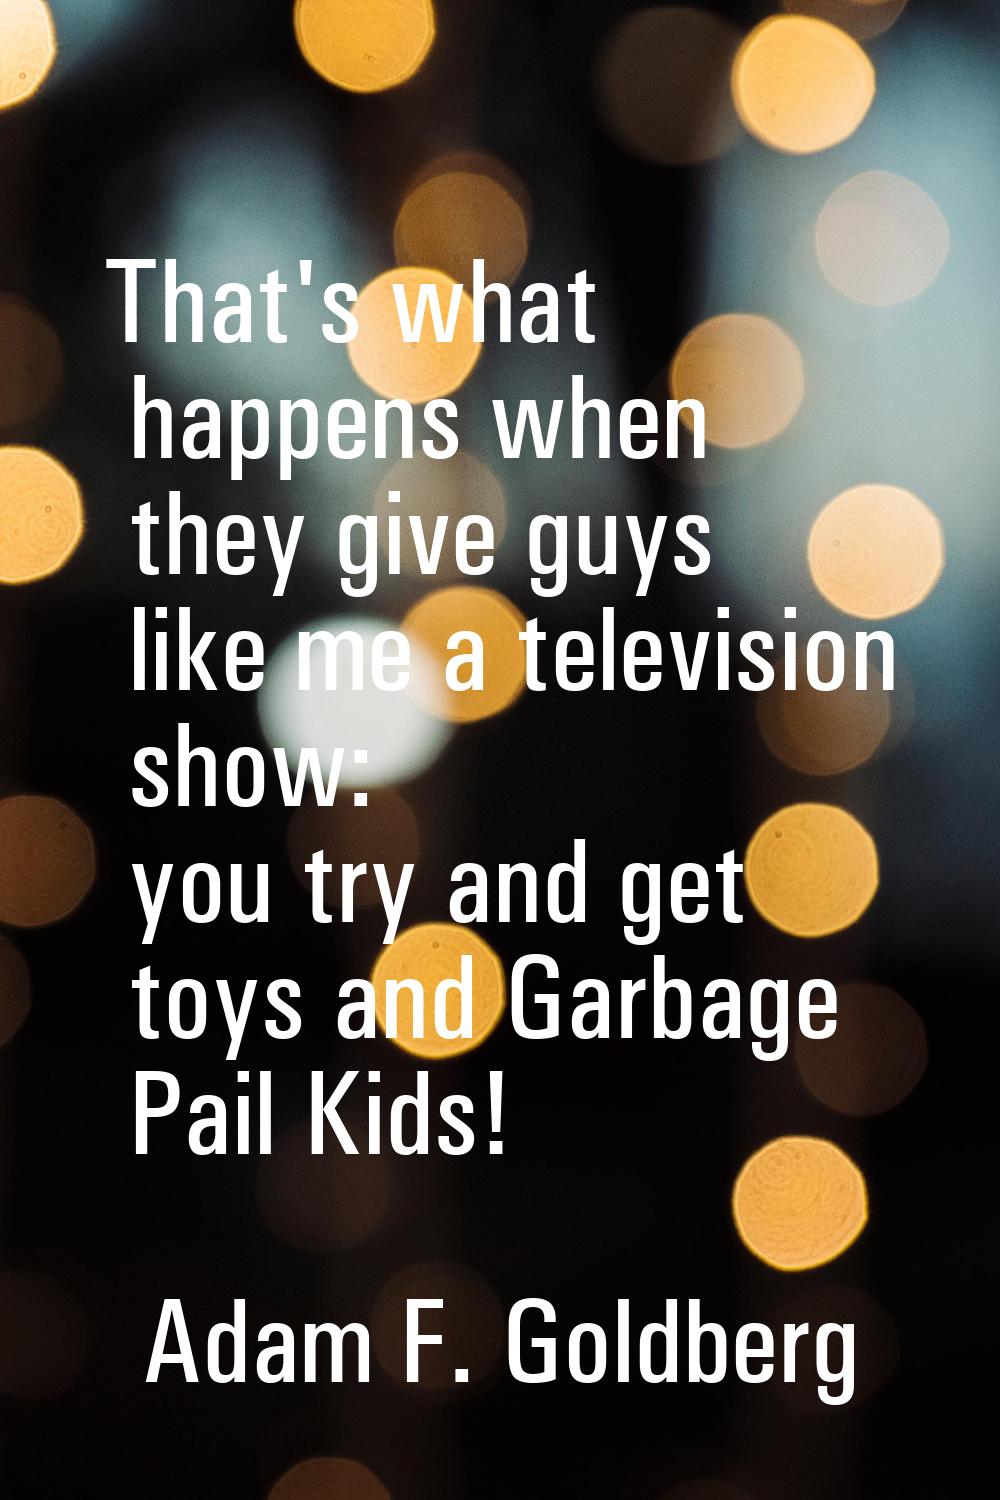 That's what happens when they give guys like me a television show: you try and get toys and Garbage